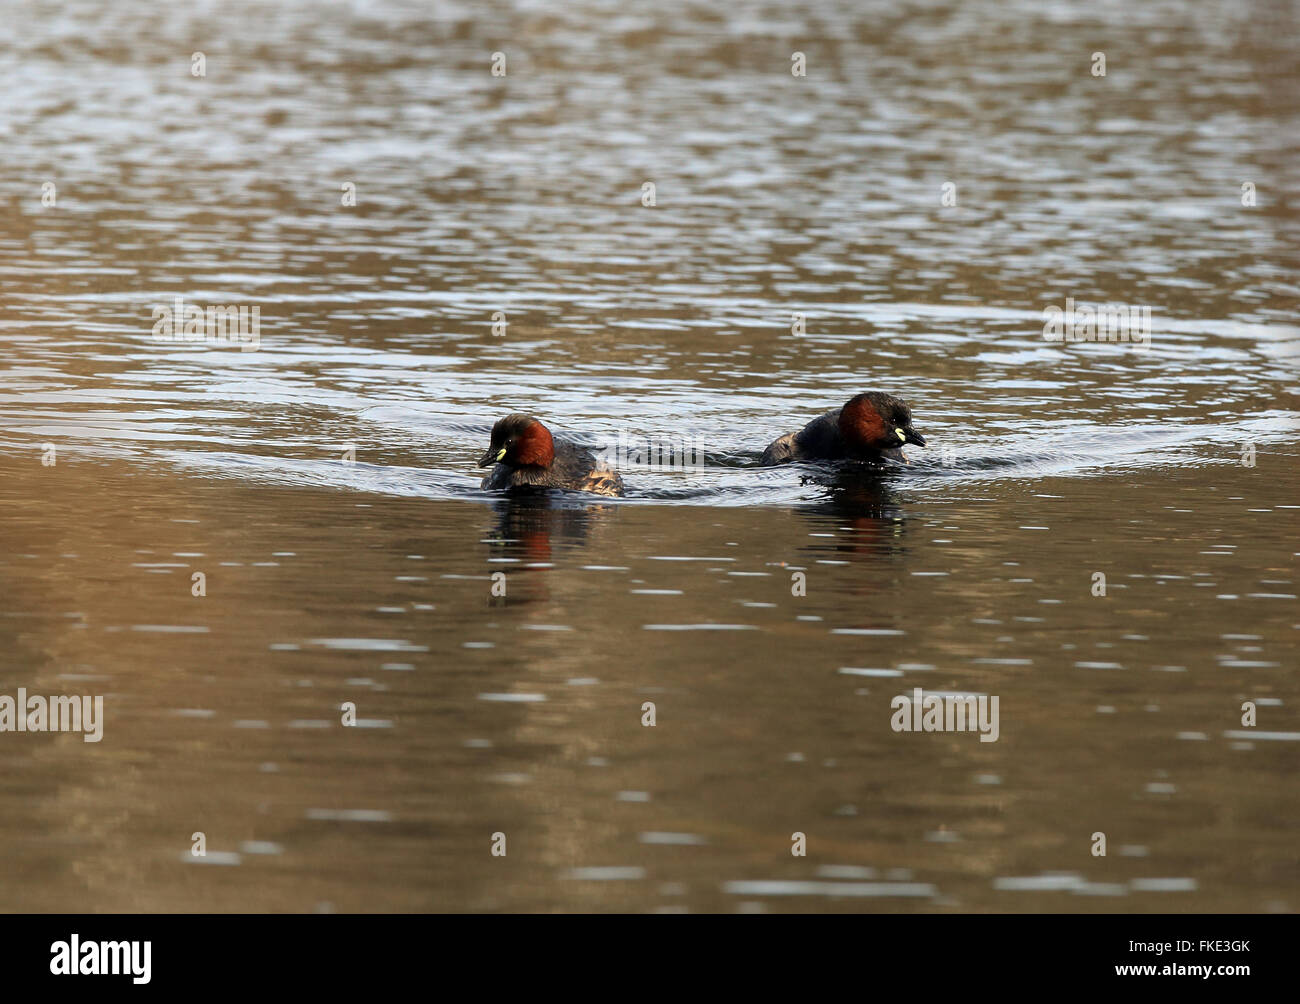 Pair of Little grebes swimming in pond Stock Photo